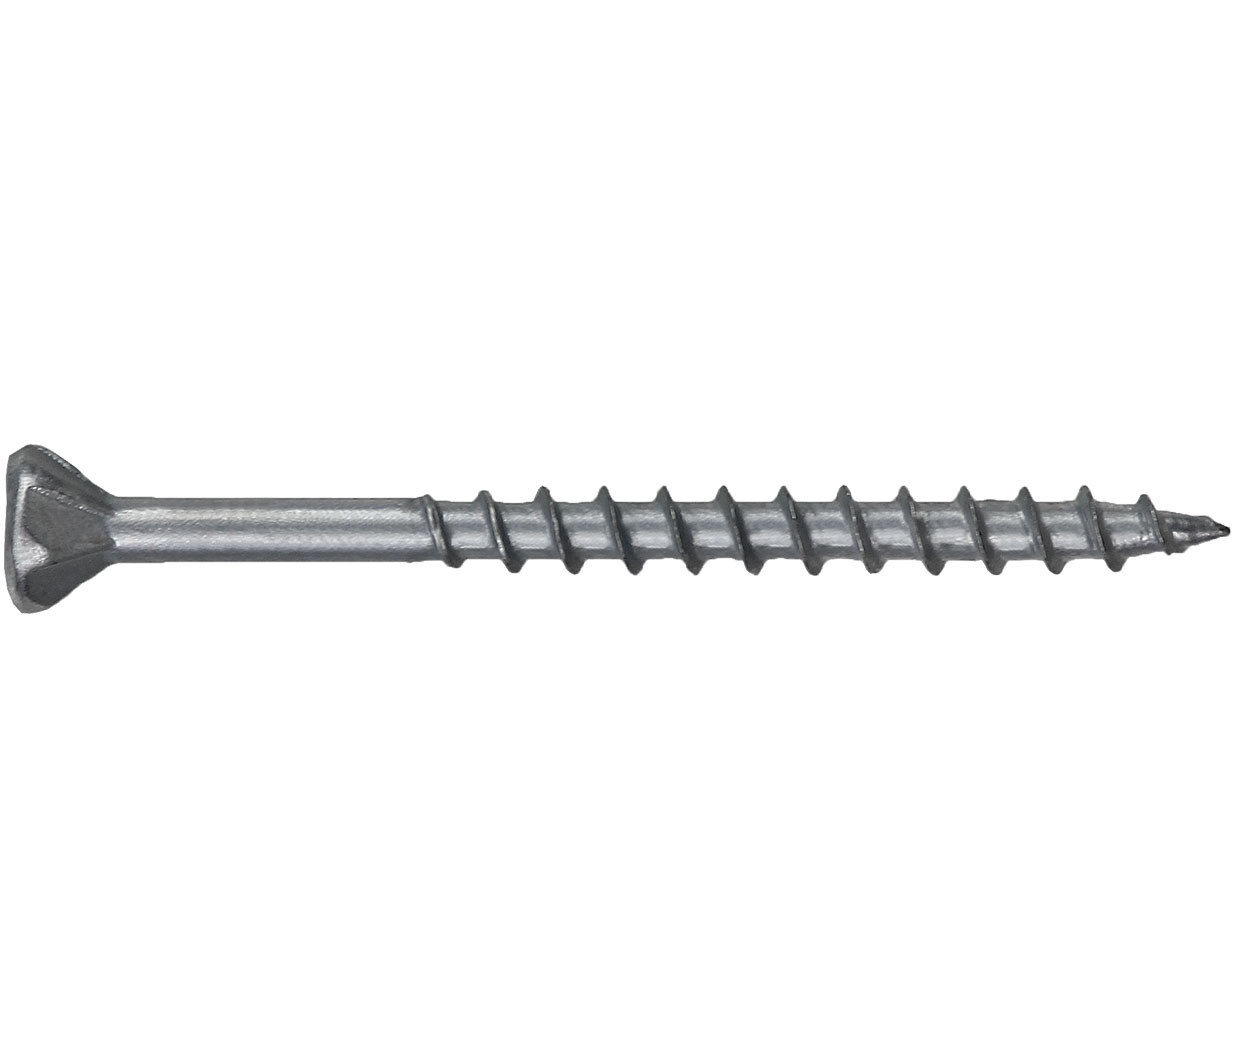 SCREW CHIPBOARD CSK RIBBED PHIL C3 10-8 X 100MM 